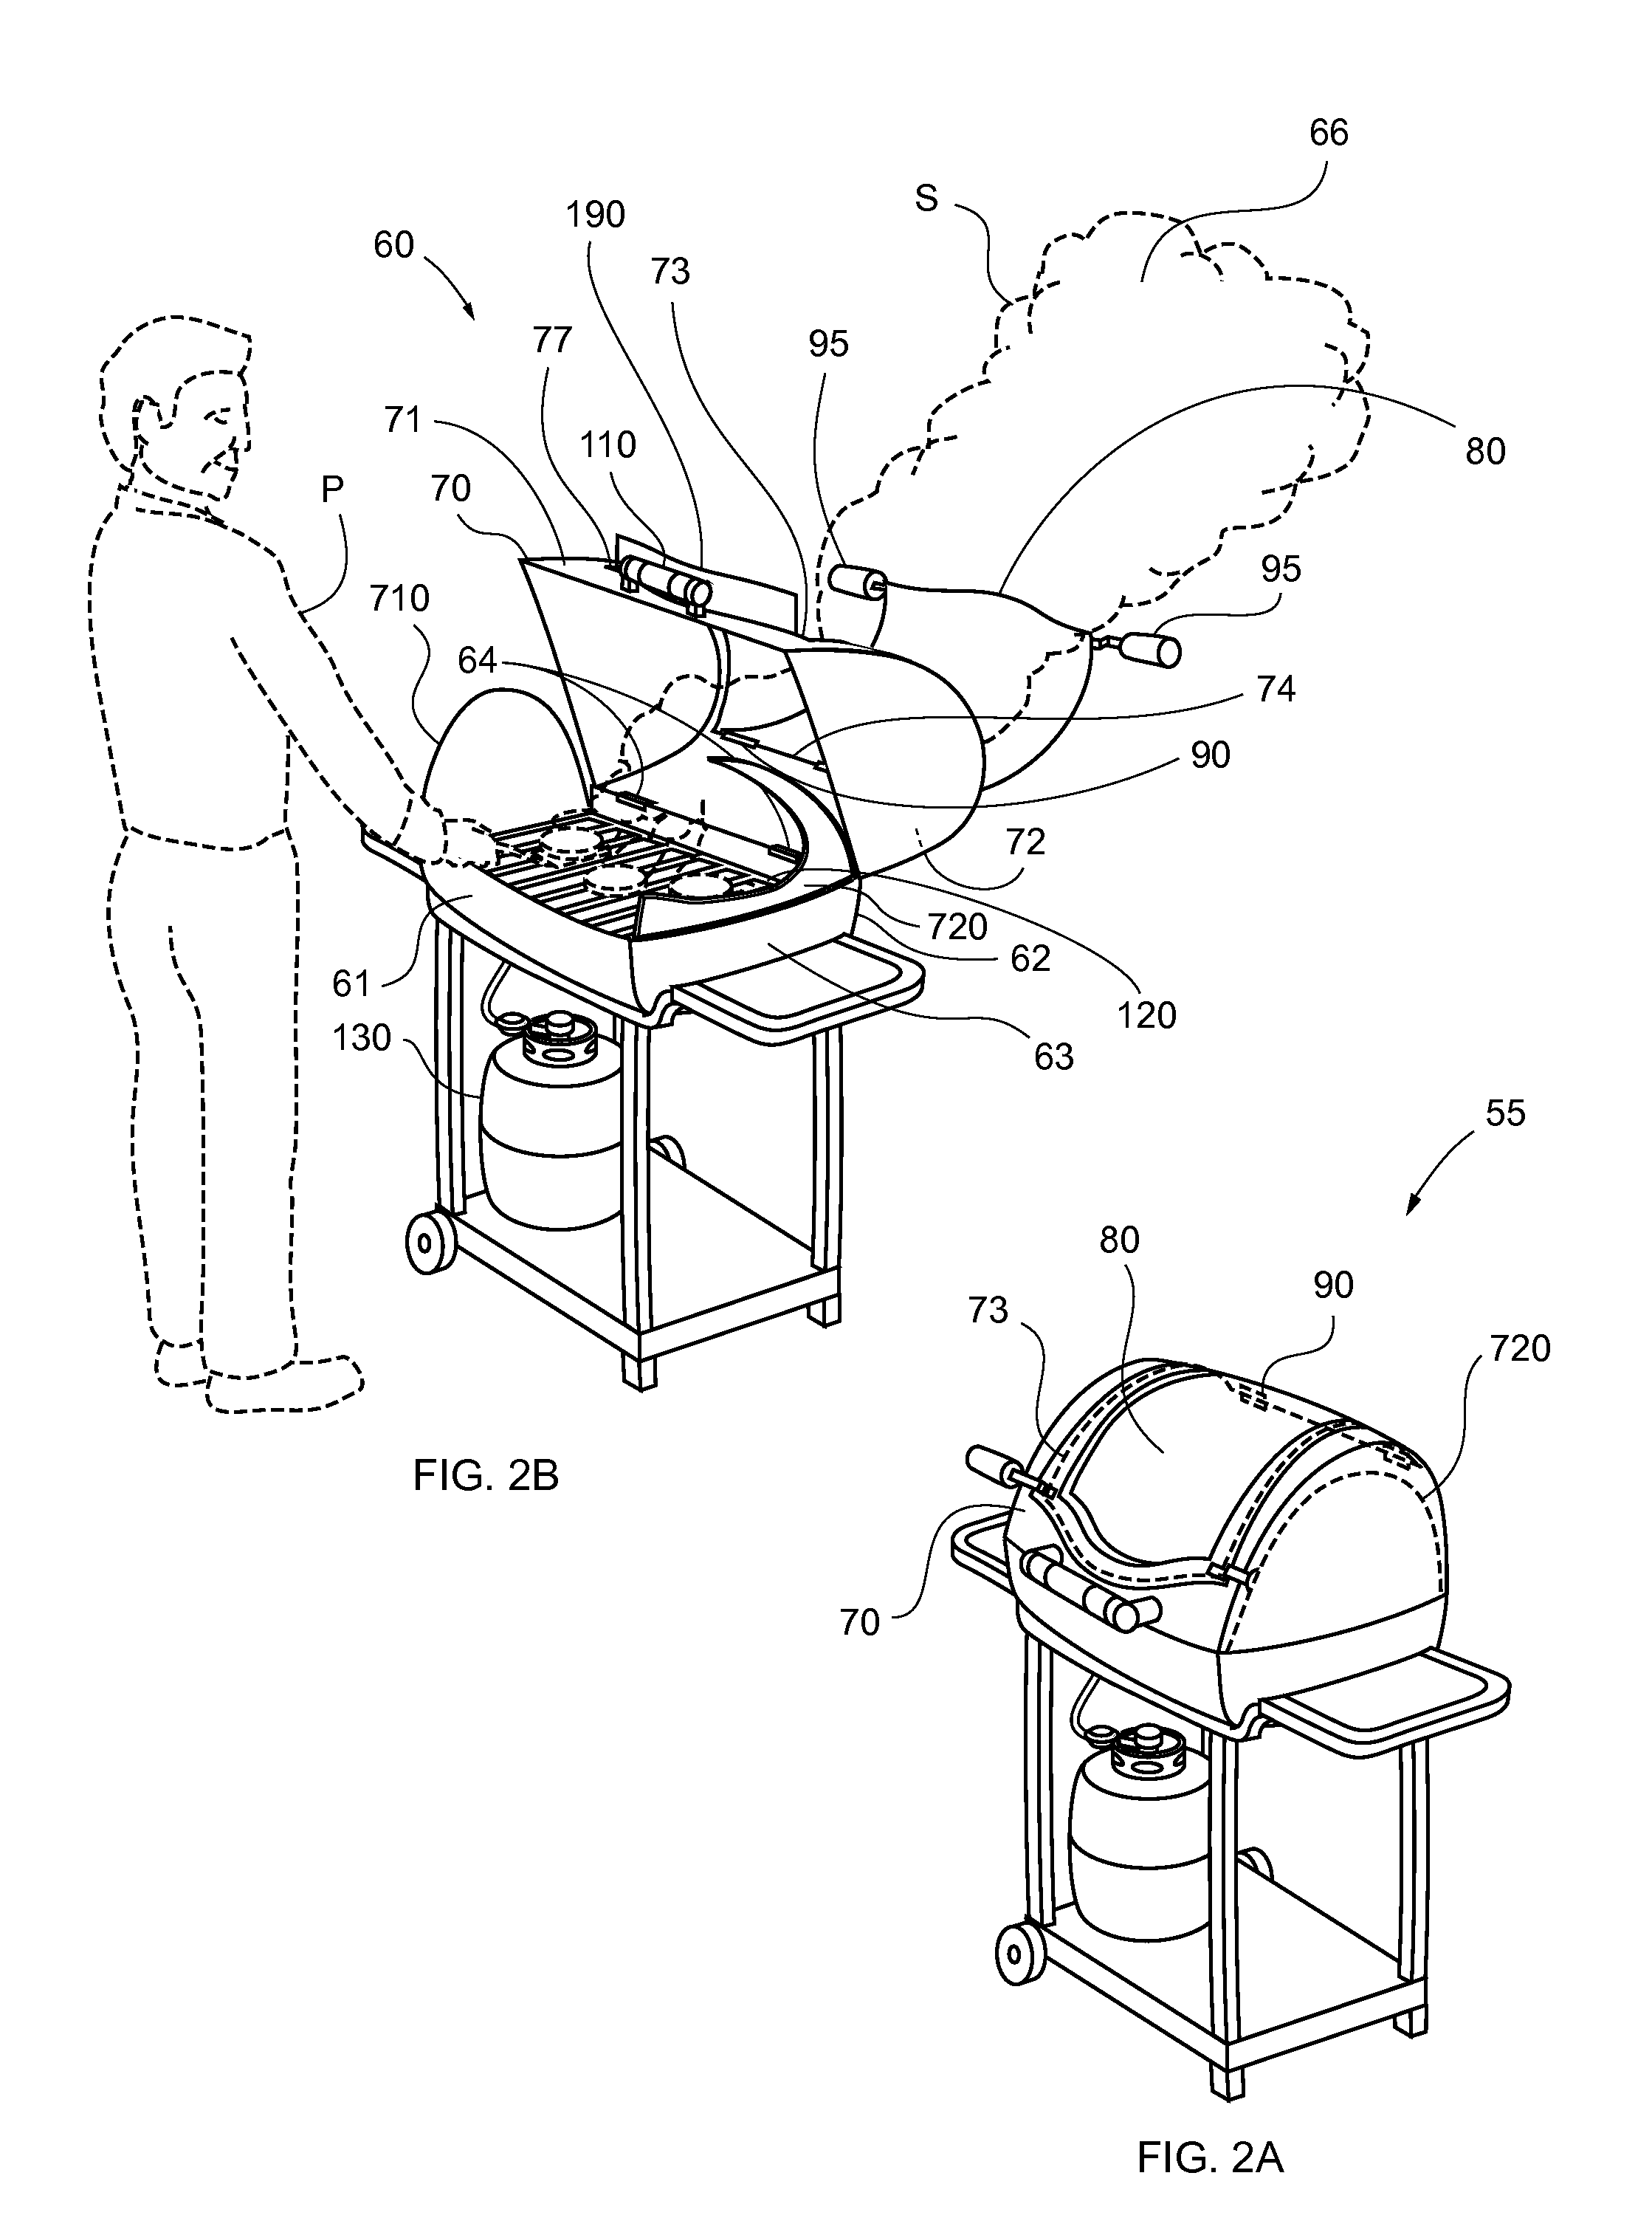 Grill and Method of Use Thereof